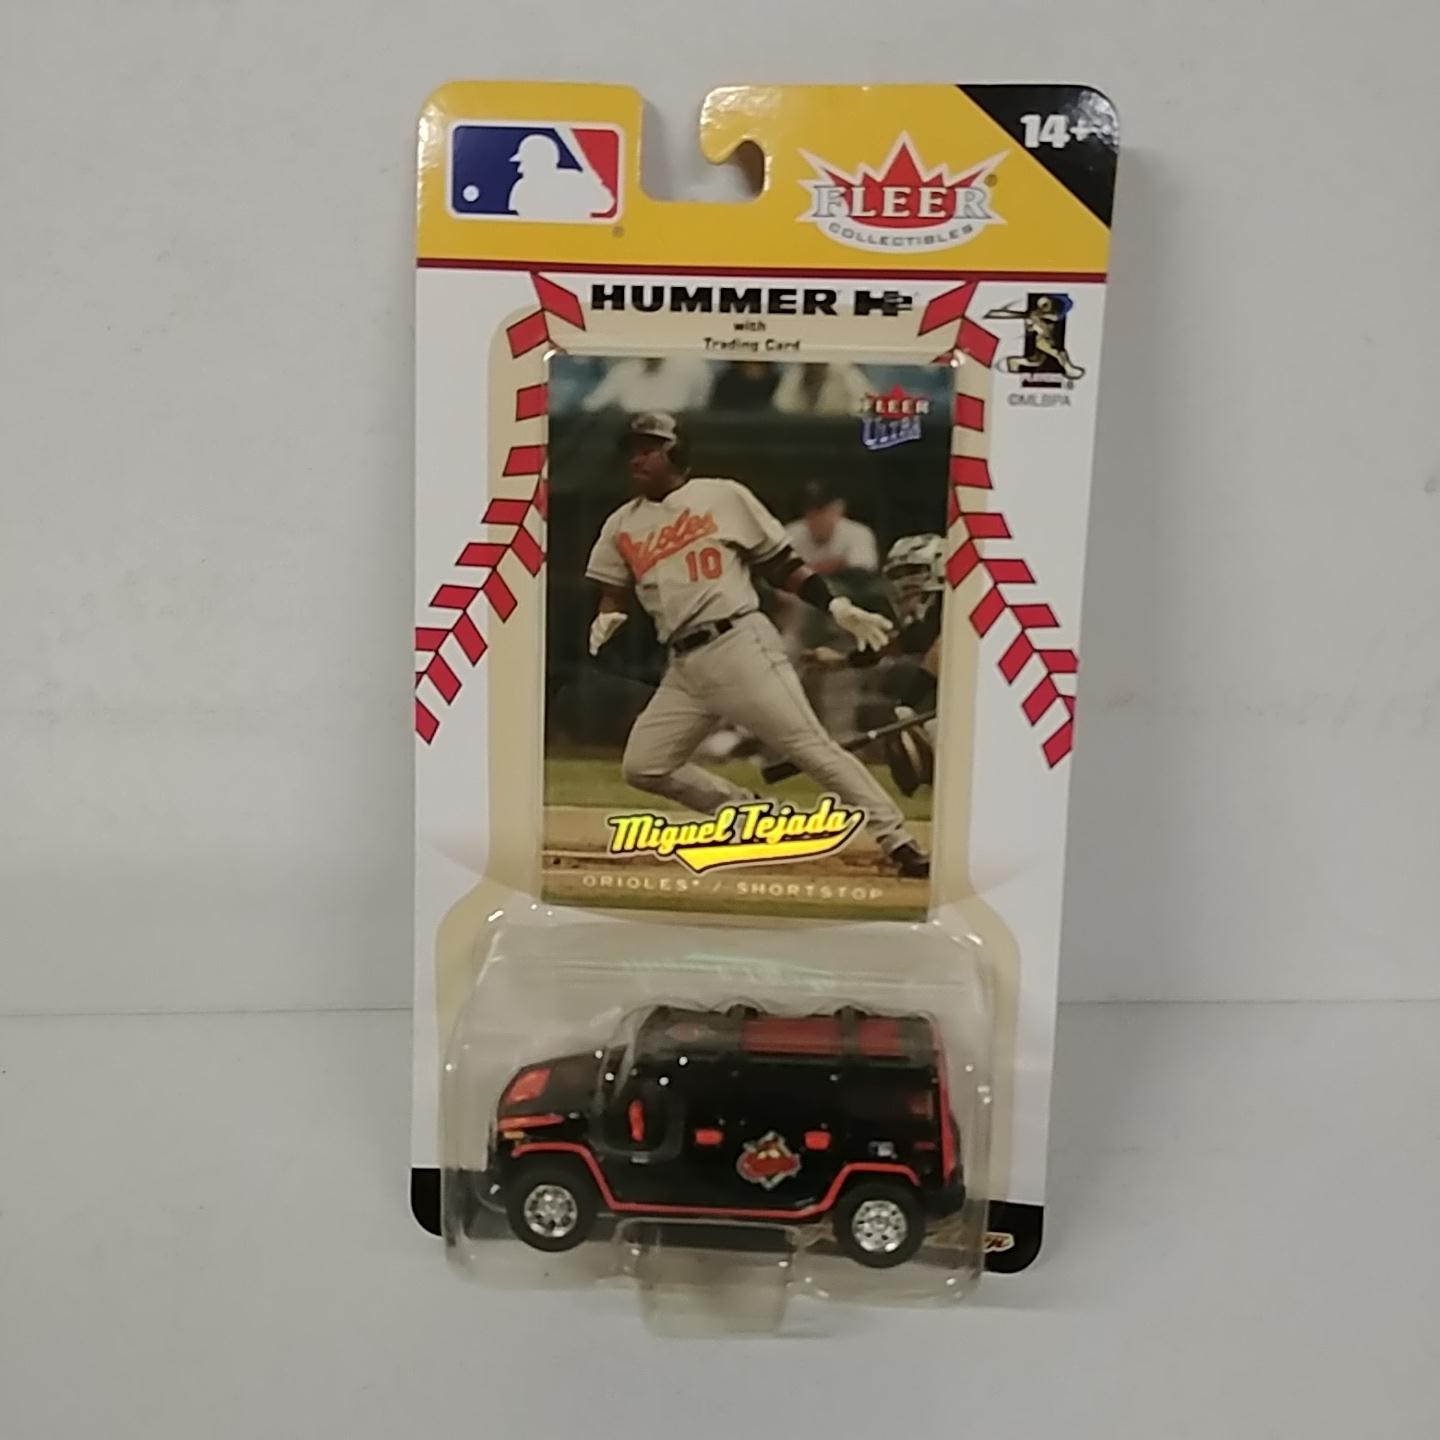 2005 Balitmore Orioles 1/64th Hummer with Miquel Tejada trading card